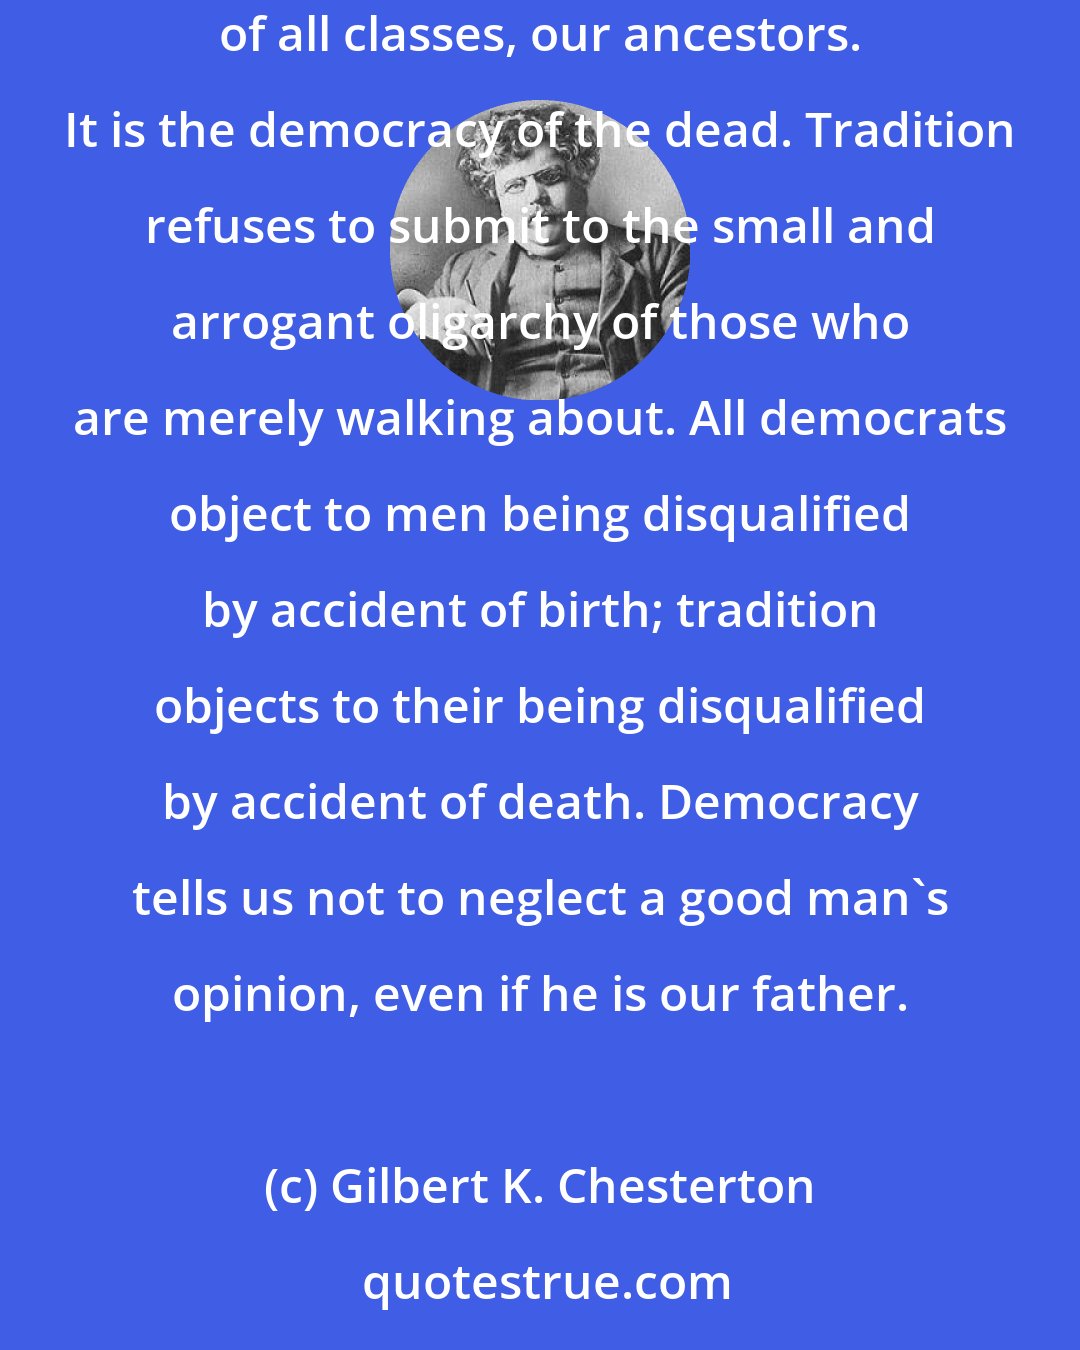 Gilbert K. Chesterton: Tradition is only democracy extended through time; it may be defined as an extension of the franchise. Tradition means giving votes to the most obscure of all classes, our ancestors. It is the democracy of the dead. Tradition refuses to submit to the small and arrogant oligarchy of those who are merely walking about. All democrats object to men being disqualified by accident of birth; tradition objects to their being disqualified by accident of death. Democracy tells us not to neglect a good man's opinion, even if he is our father.